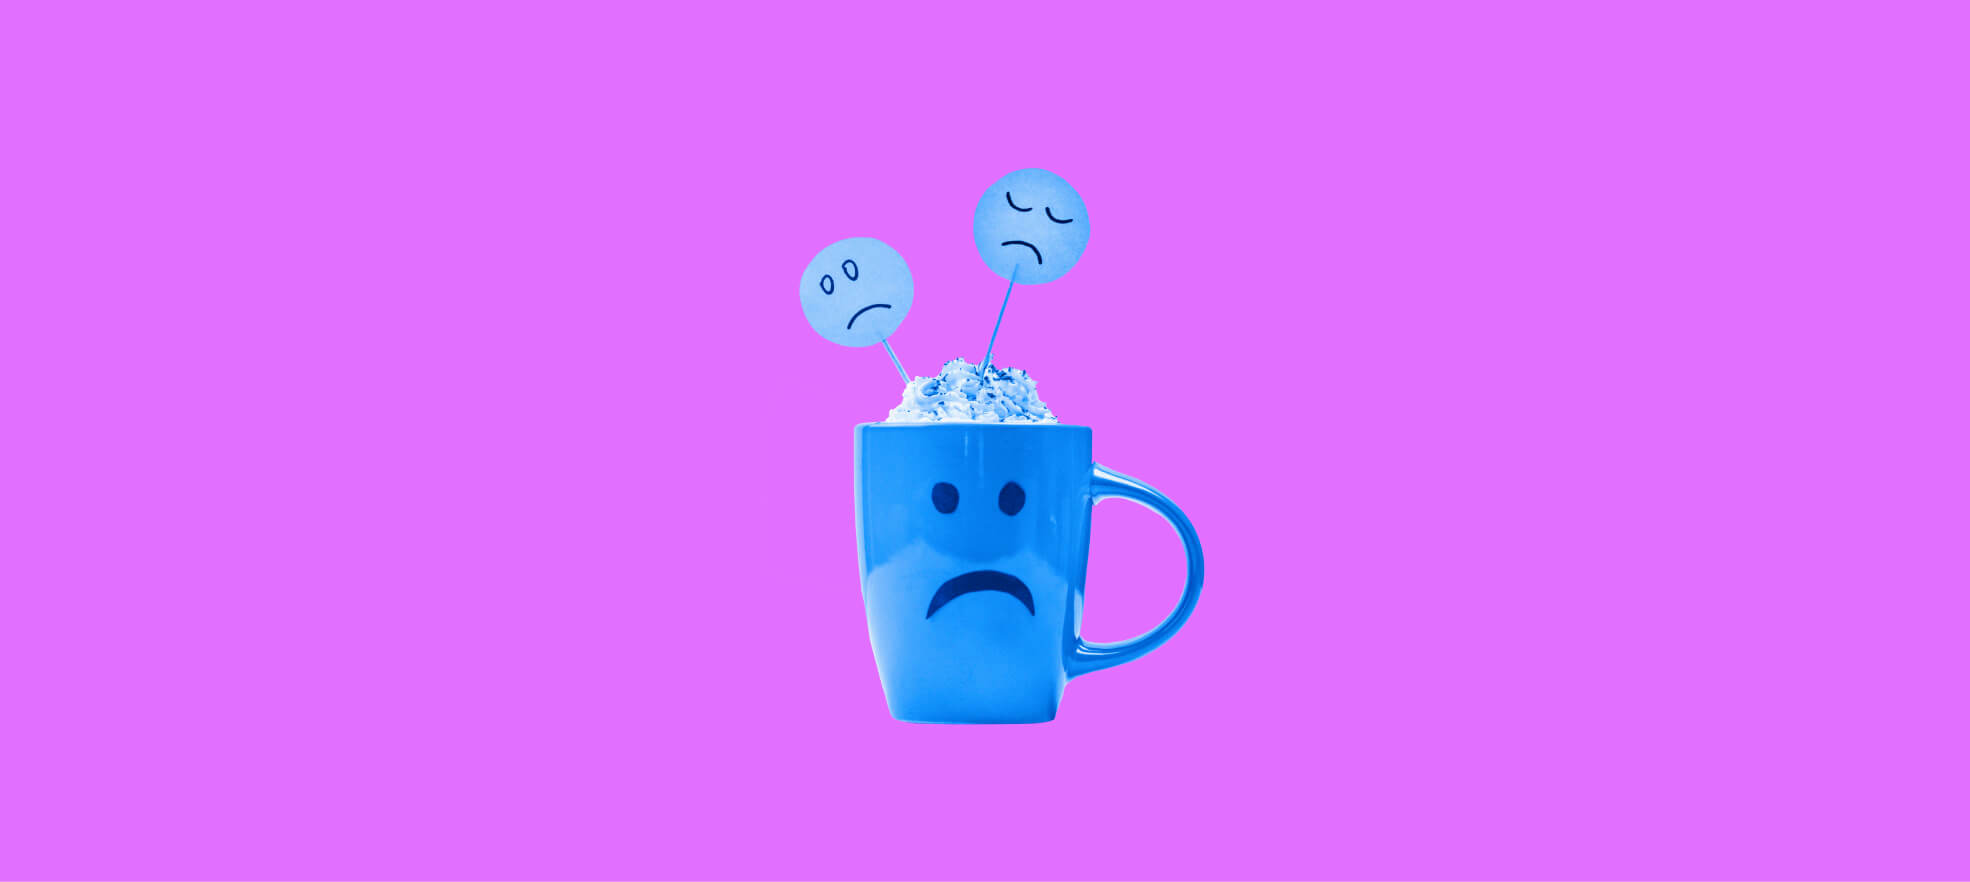 a cup with a sad smiley